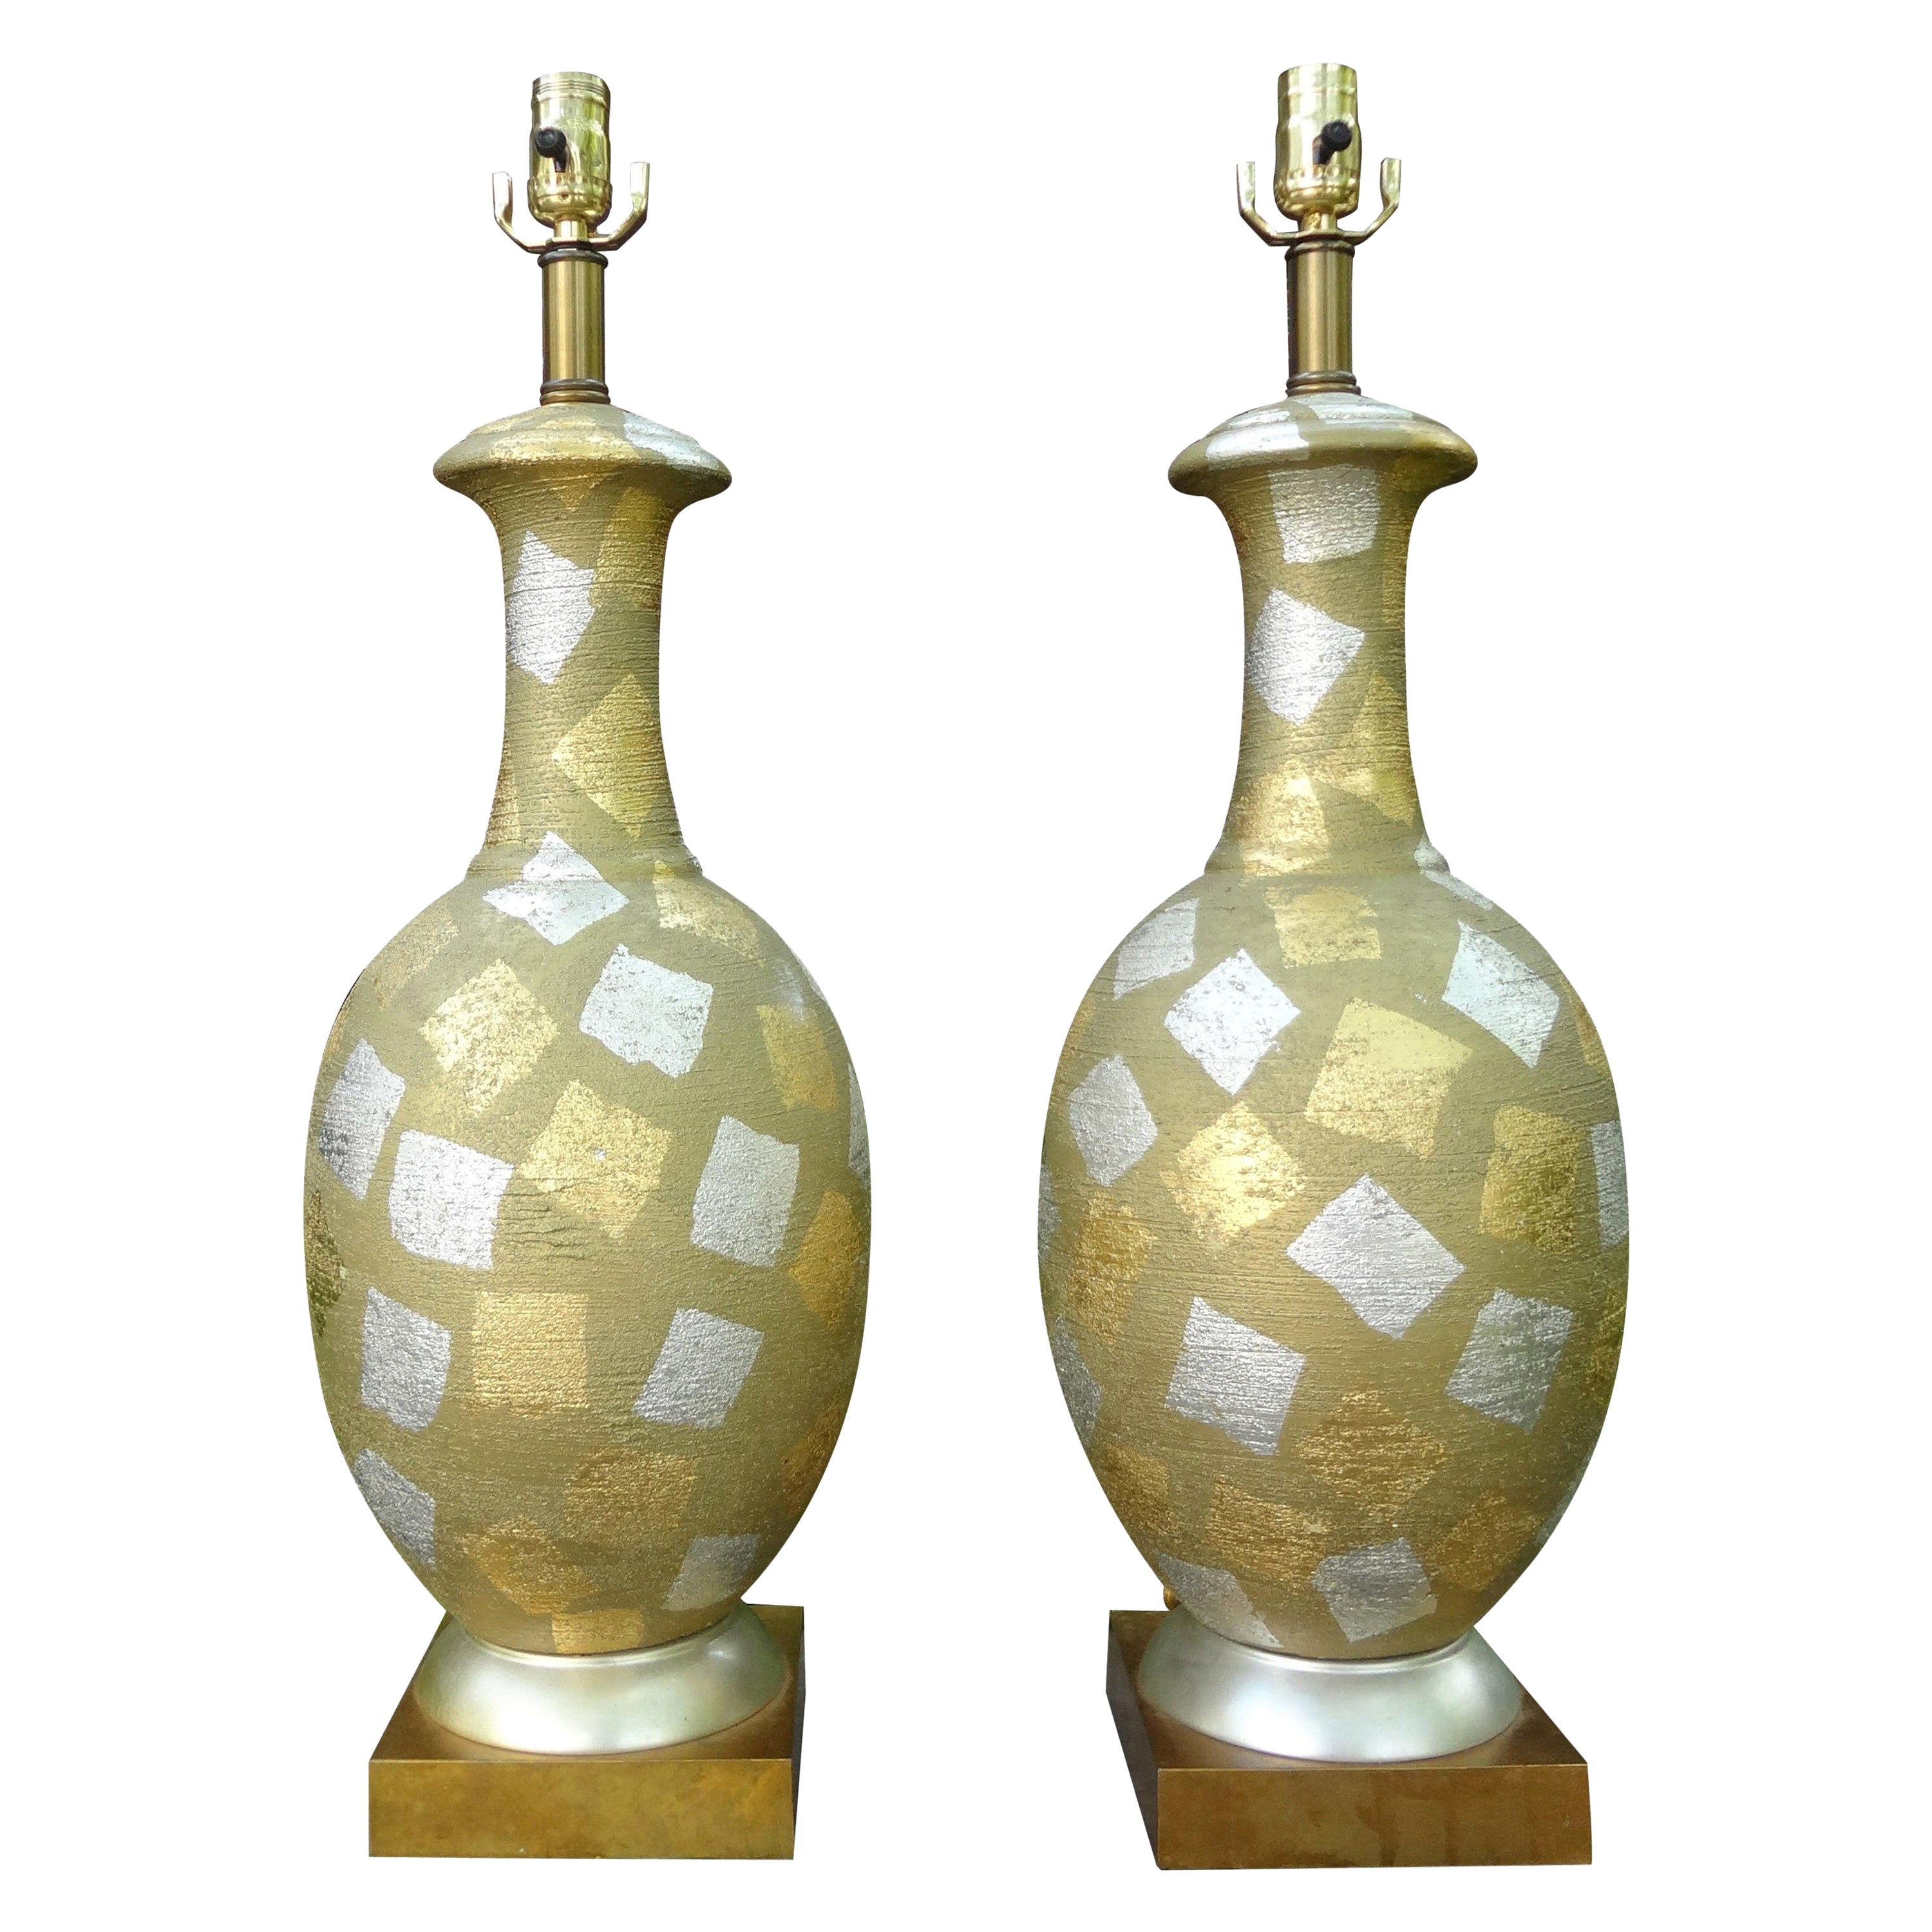 Pair of Hollywood Regency Gold and Silver Gilt Harlequin Lamps